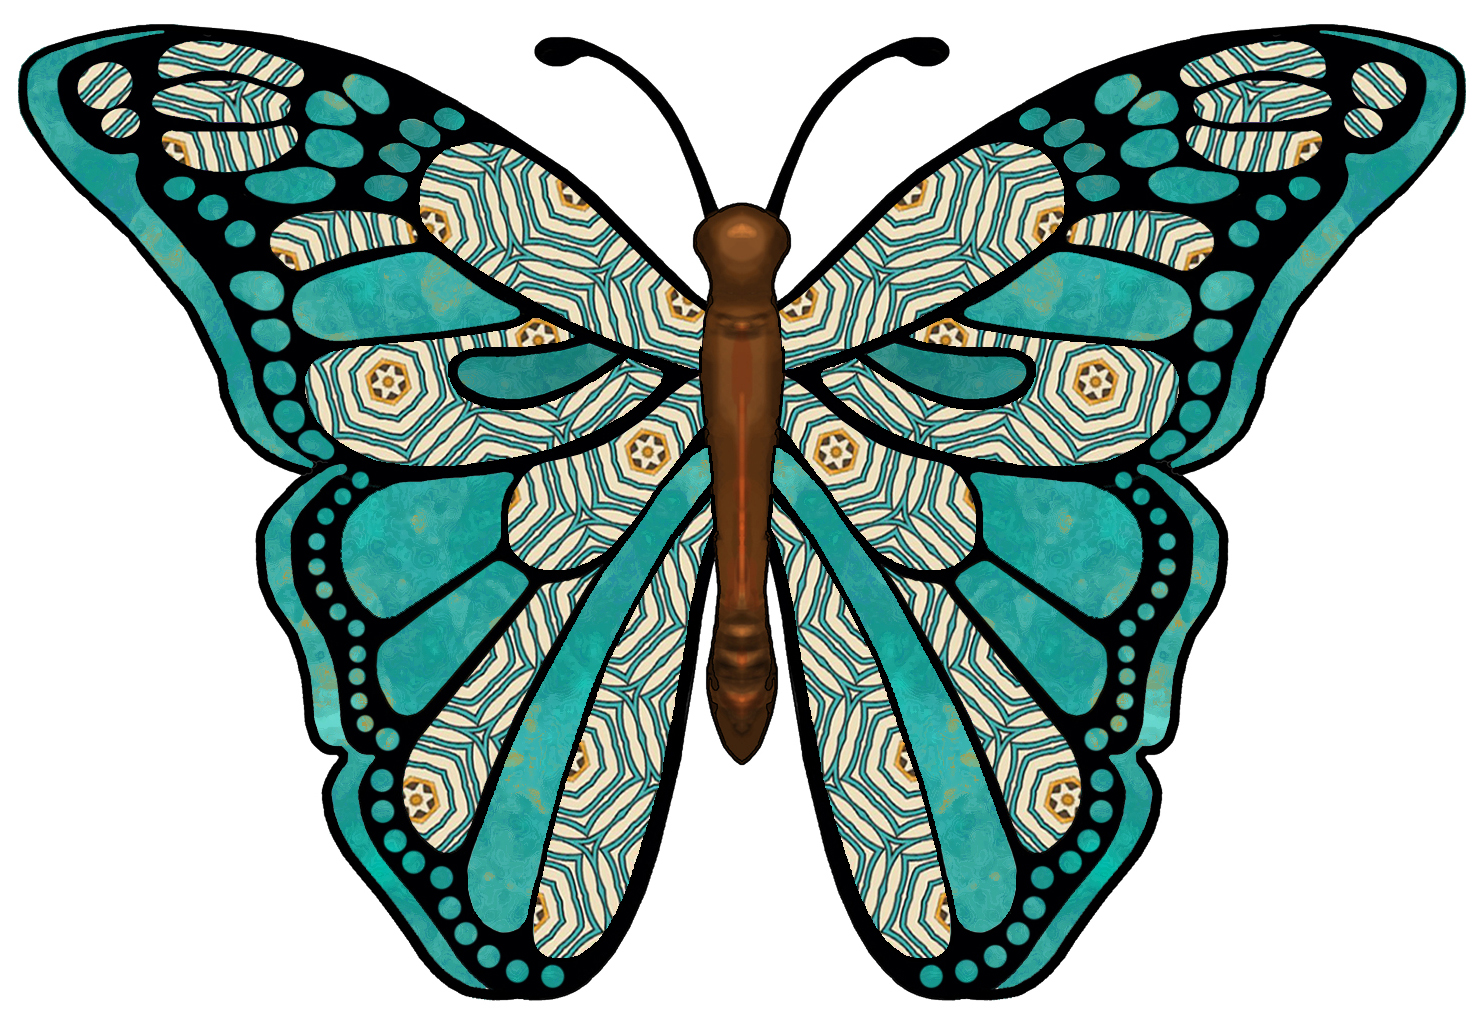 ArtbyJean - Paper Crafts: BUTTERFLIES - Clip art to cut and paste on